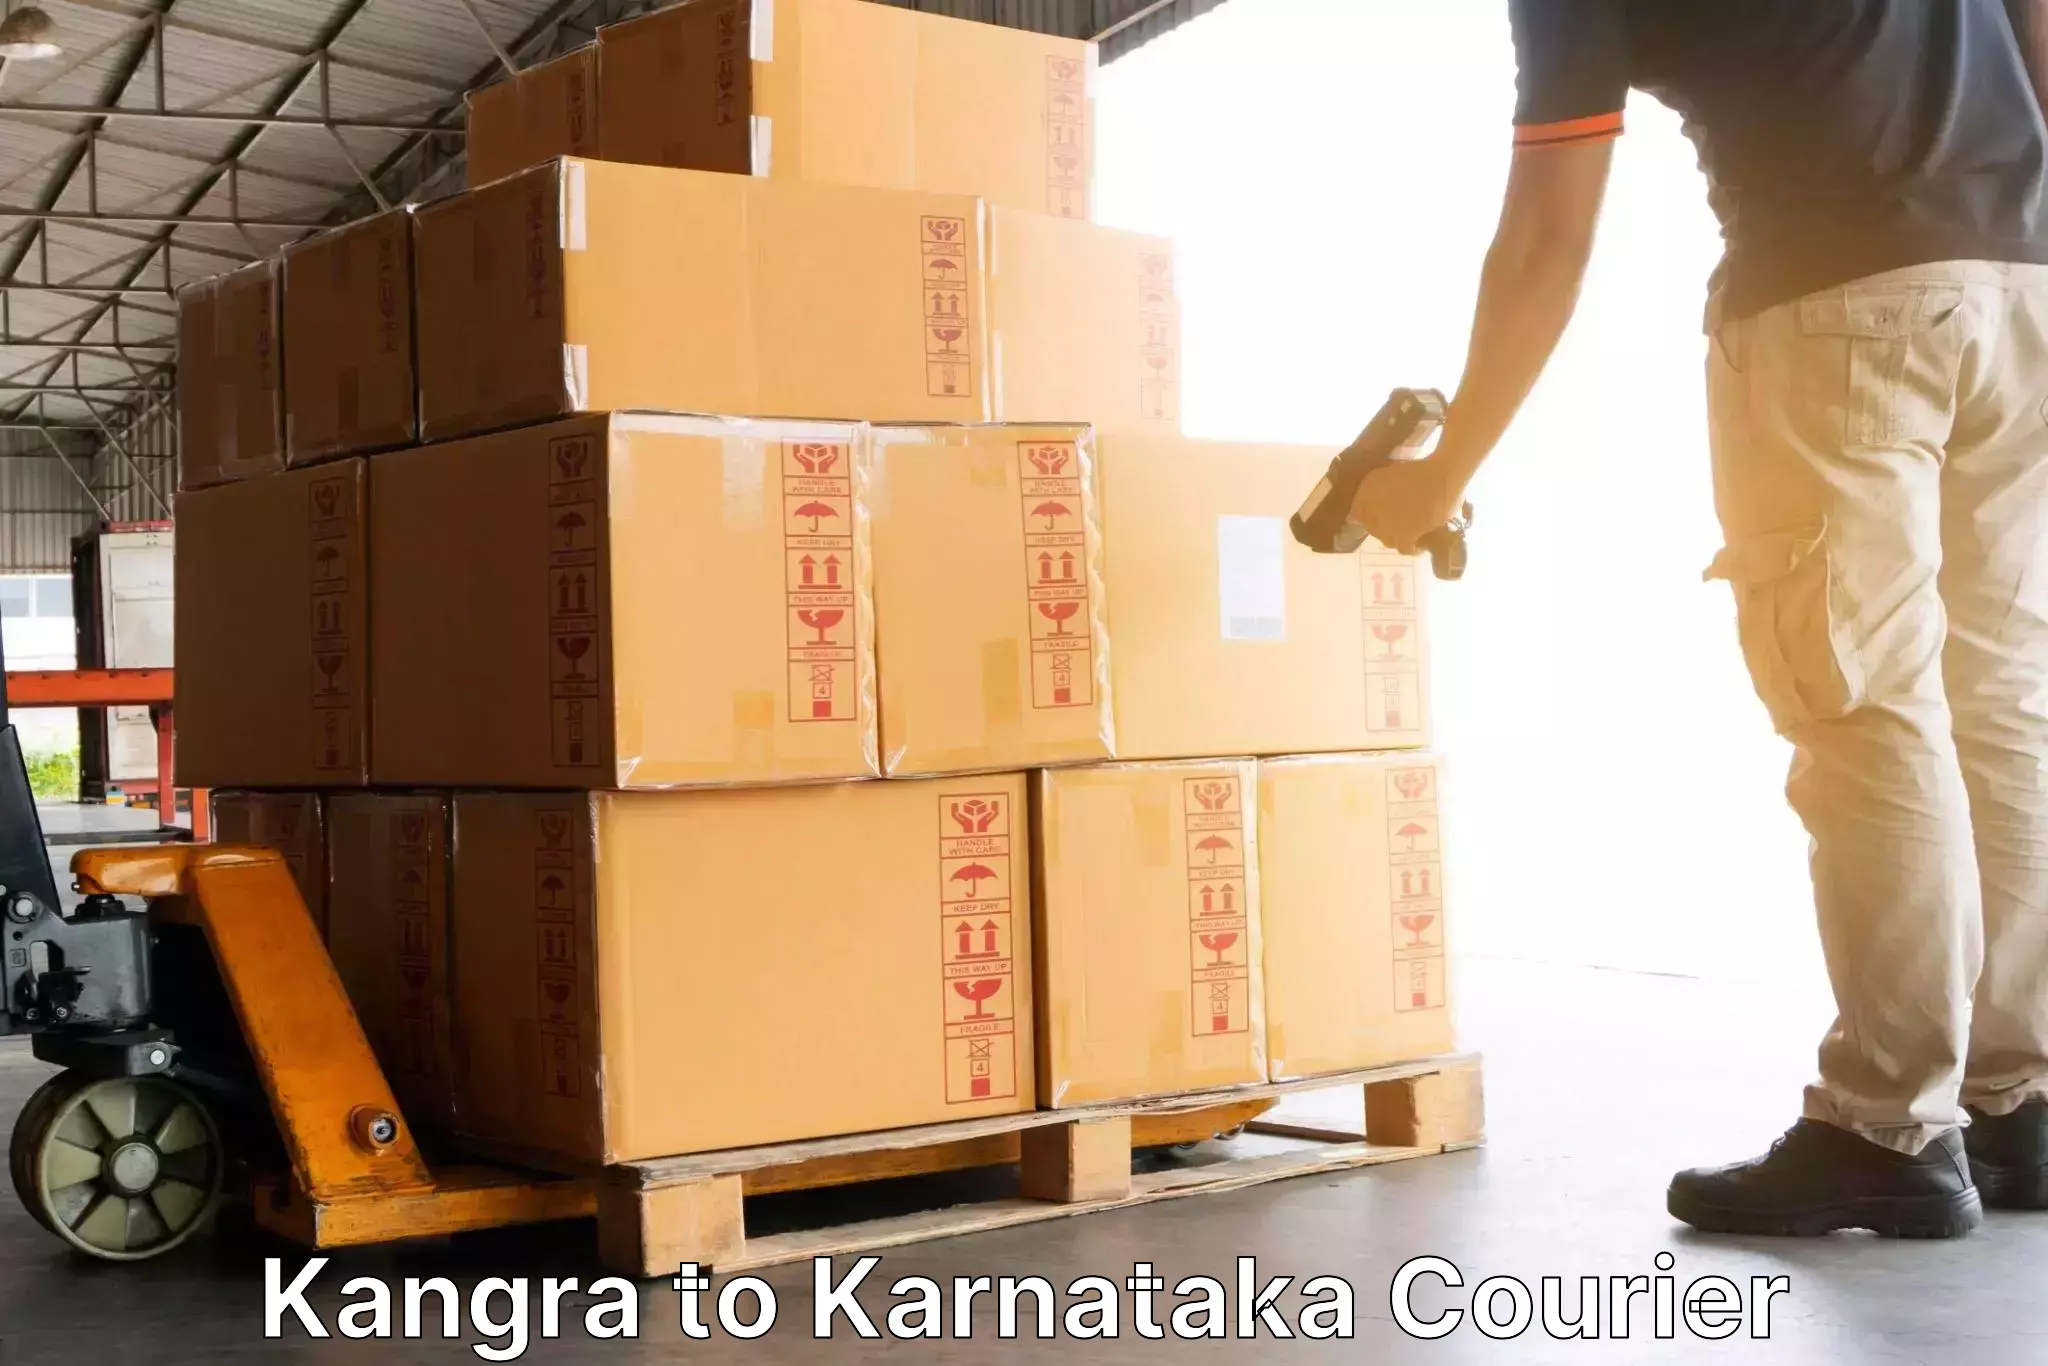 End-to-end delivery in Kangra to Kanakapura